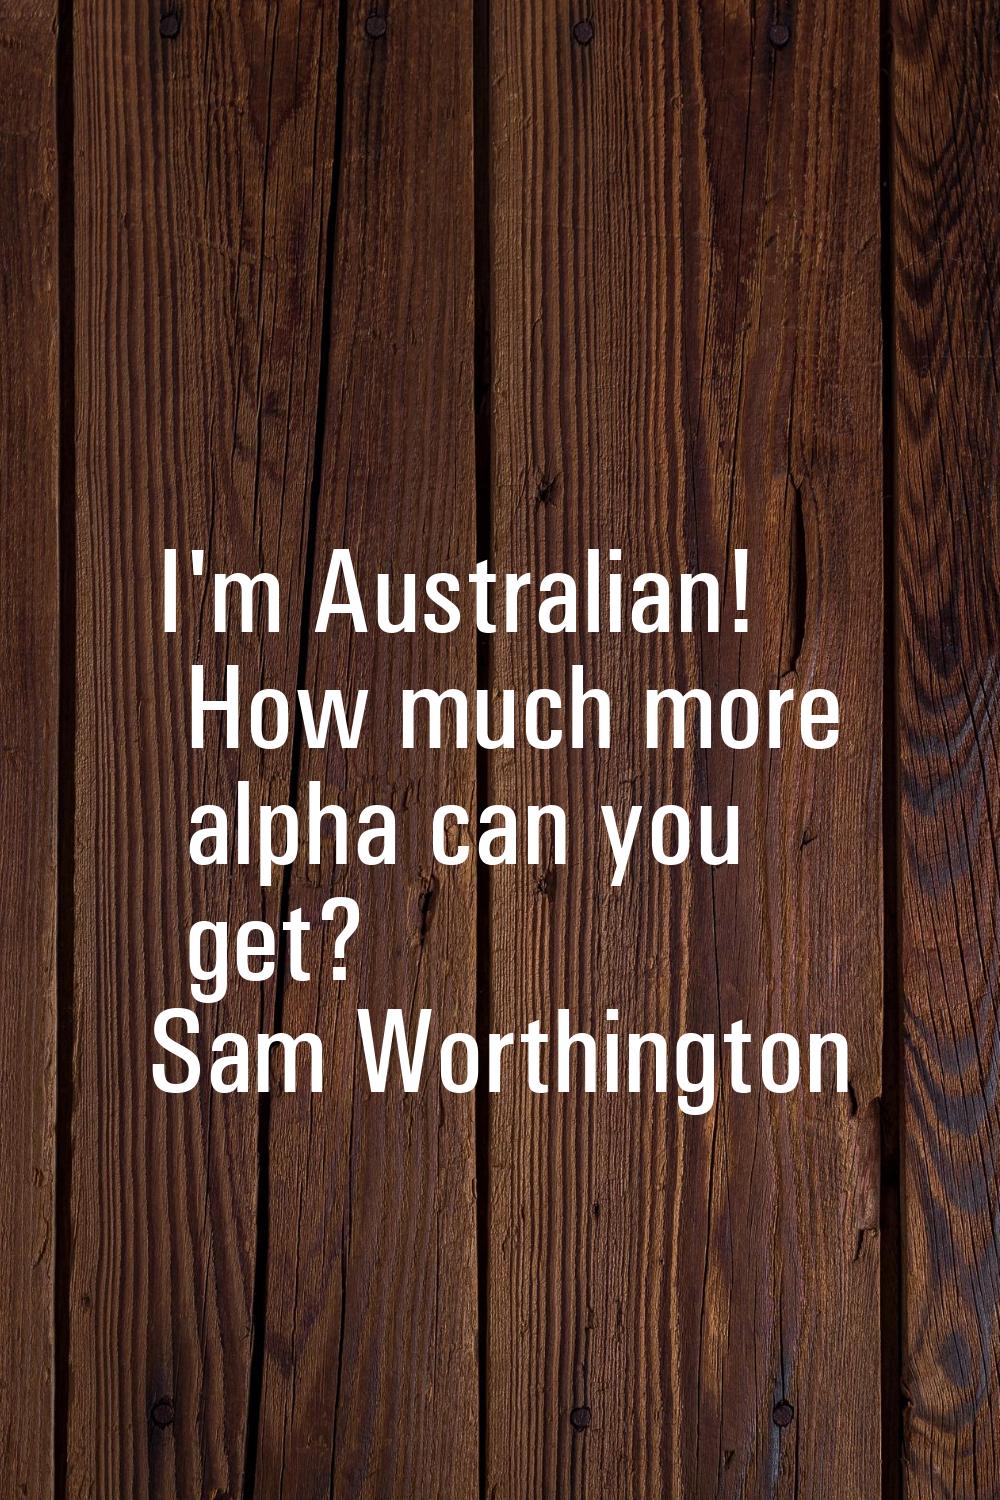 I'm Australian! How much more alpha can you get?